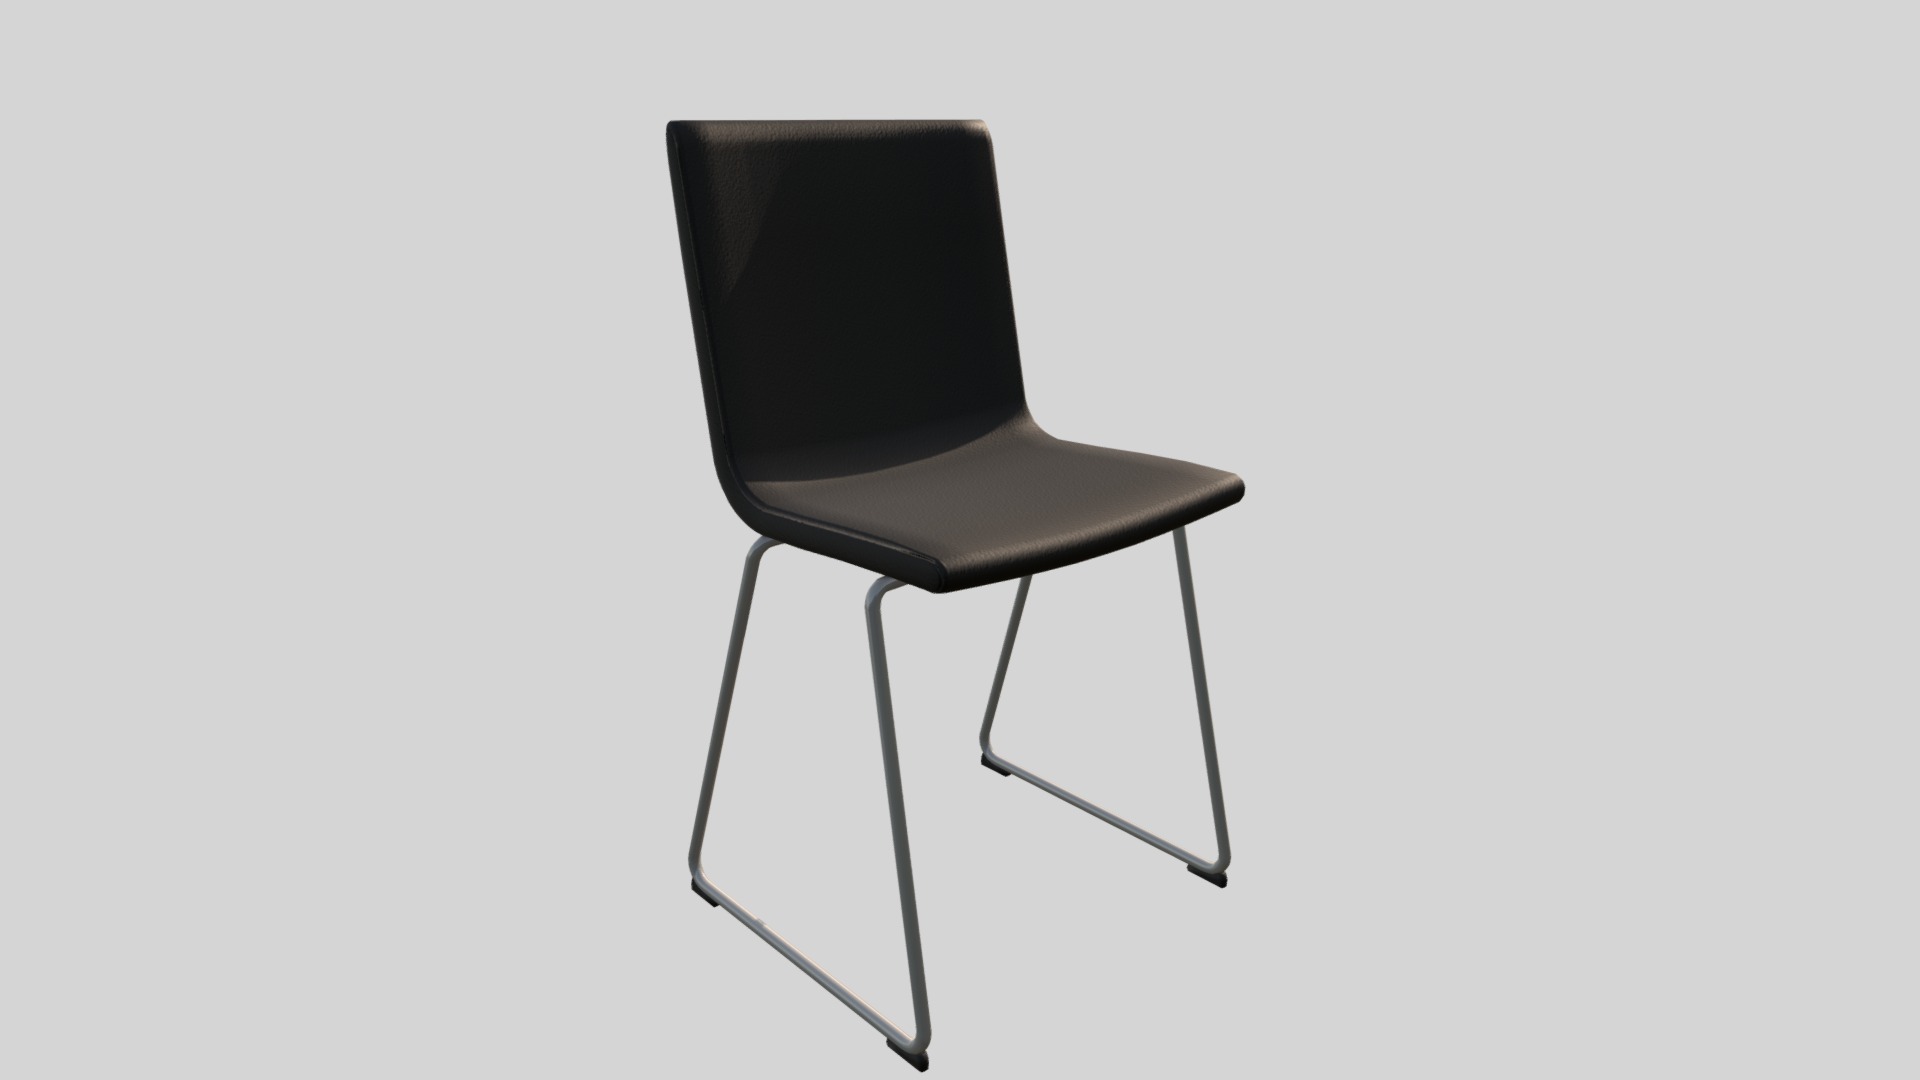 3D model Chair Volfgang - This is a 3D model of the Chair Volfgang. The 3D model is about a black office chair.